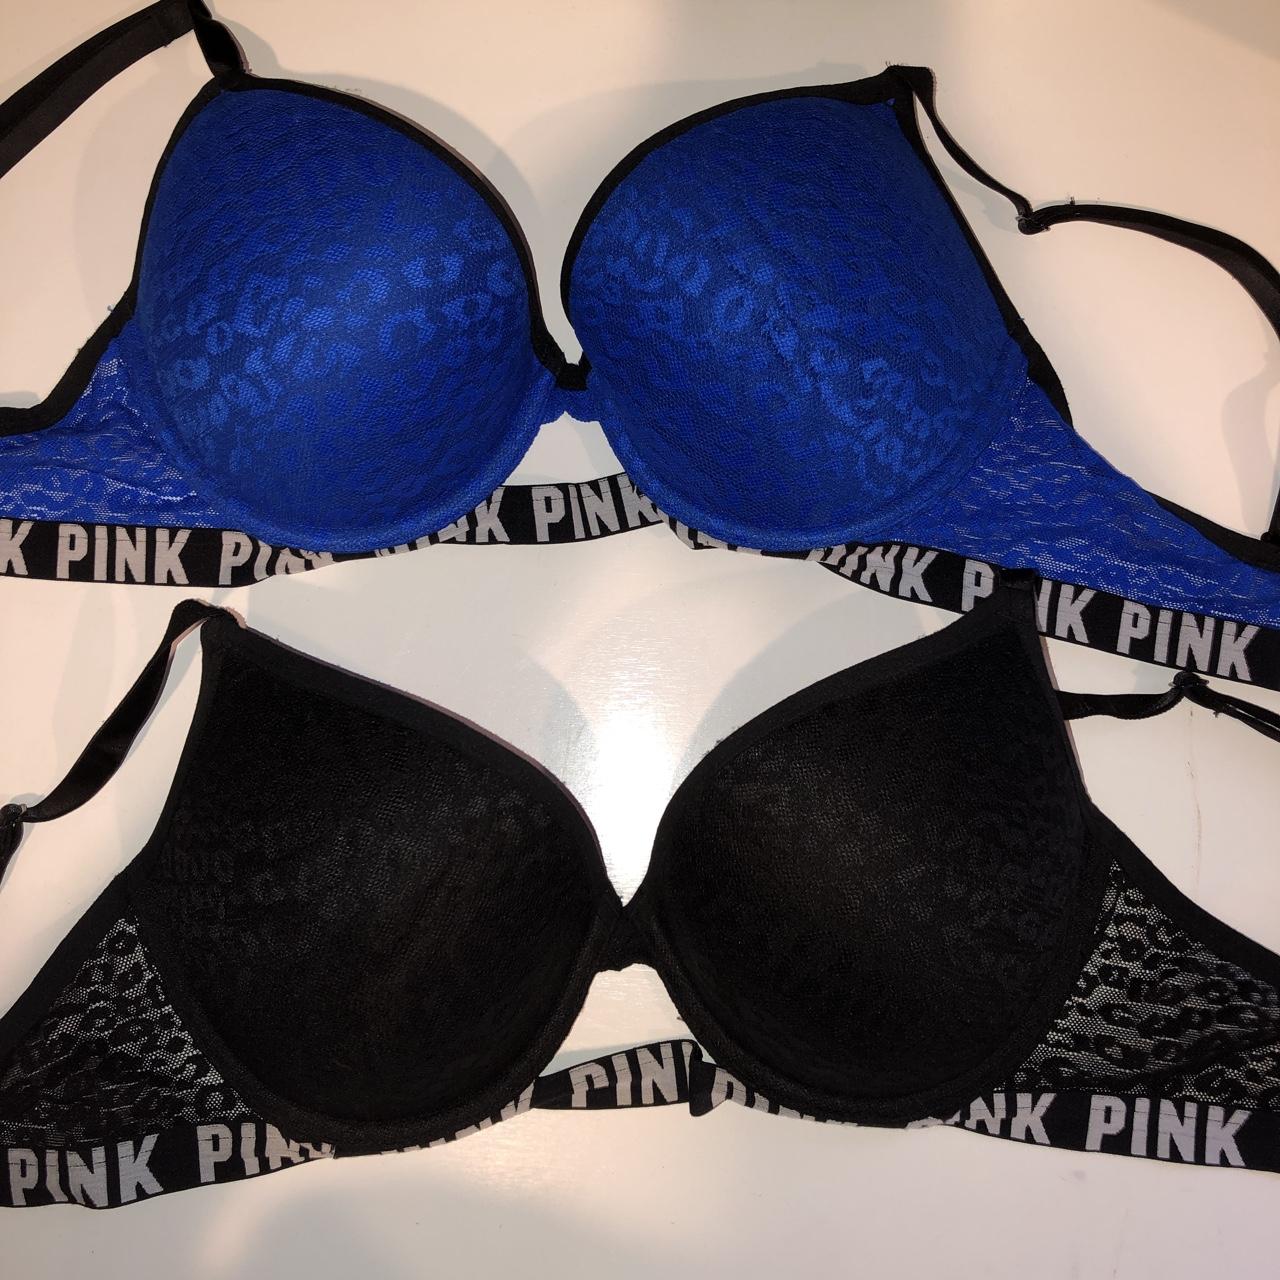 Pink brand push up bras blue and black with lace.